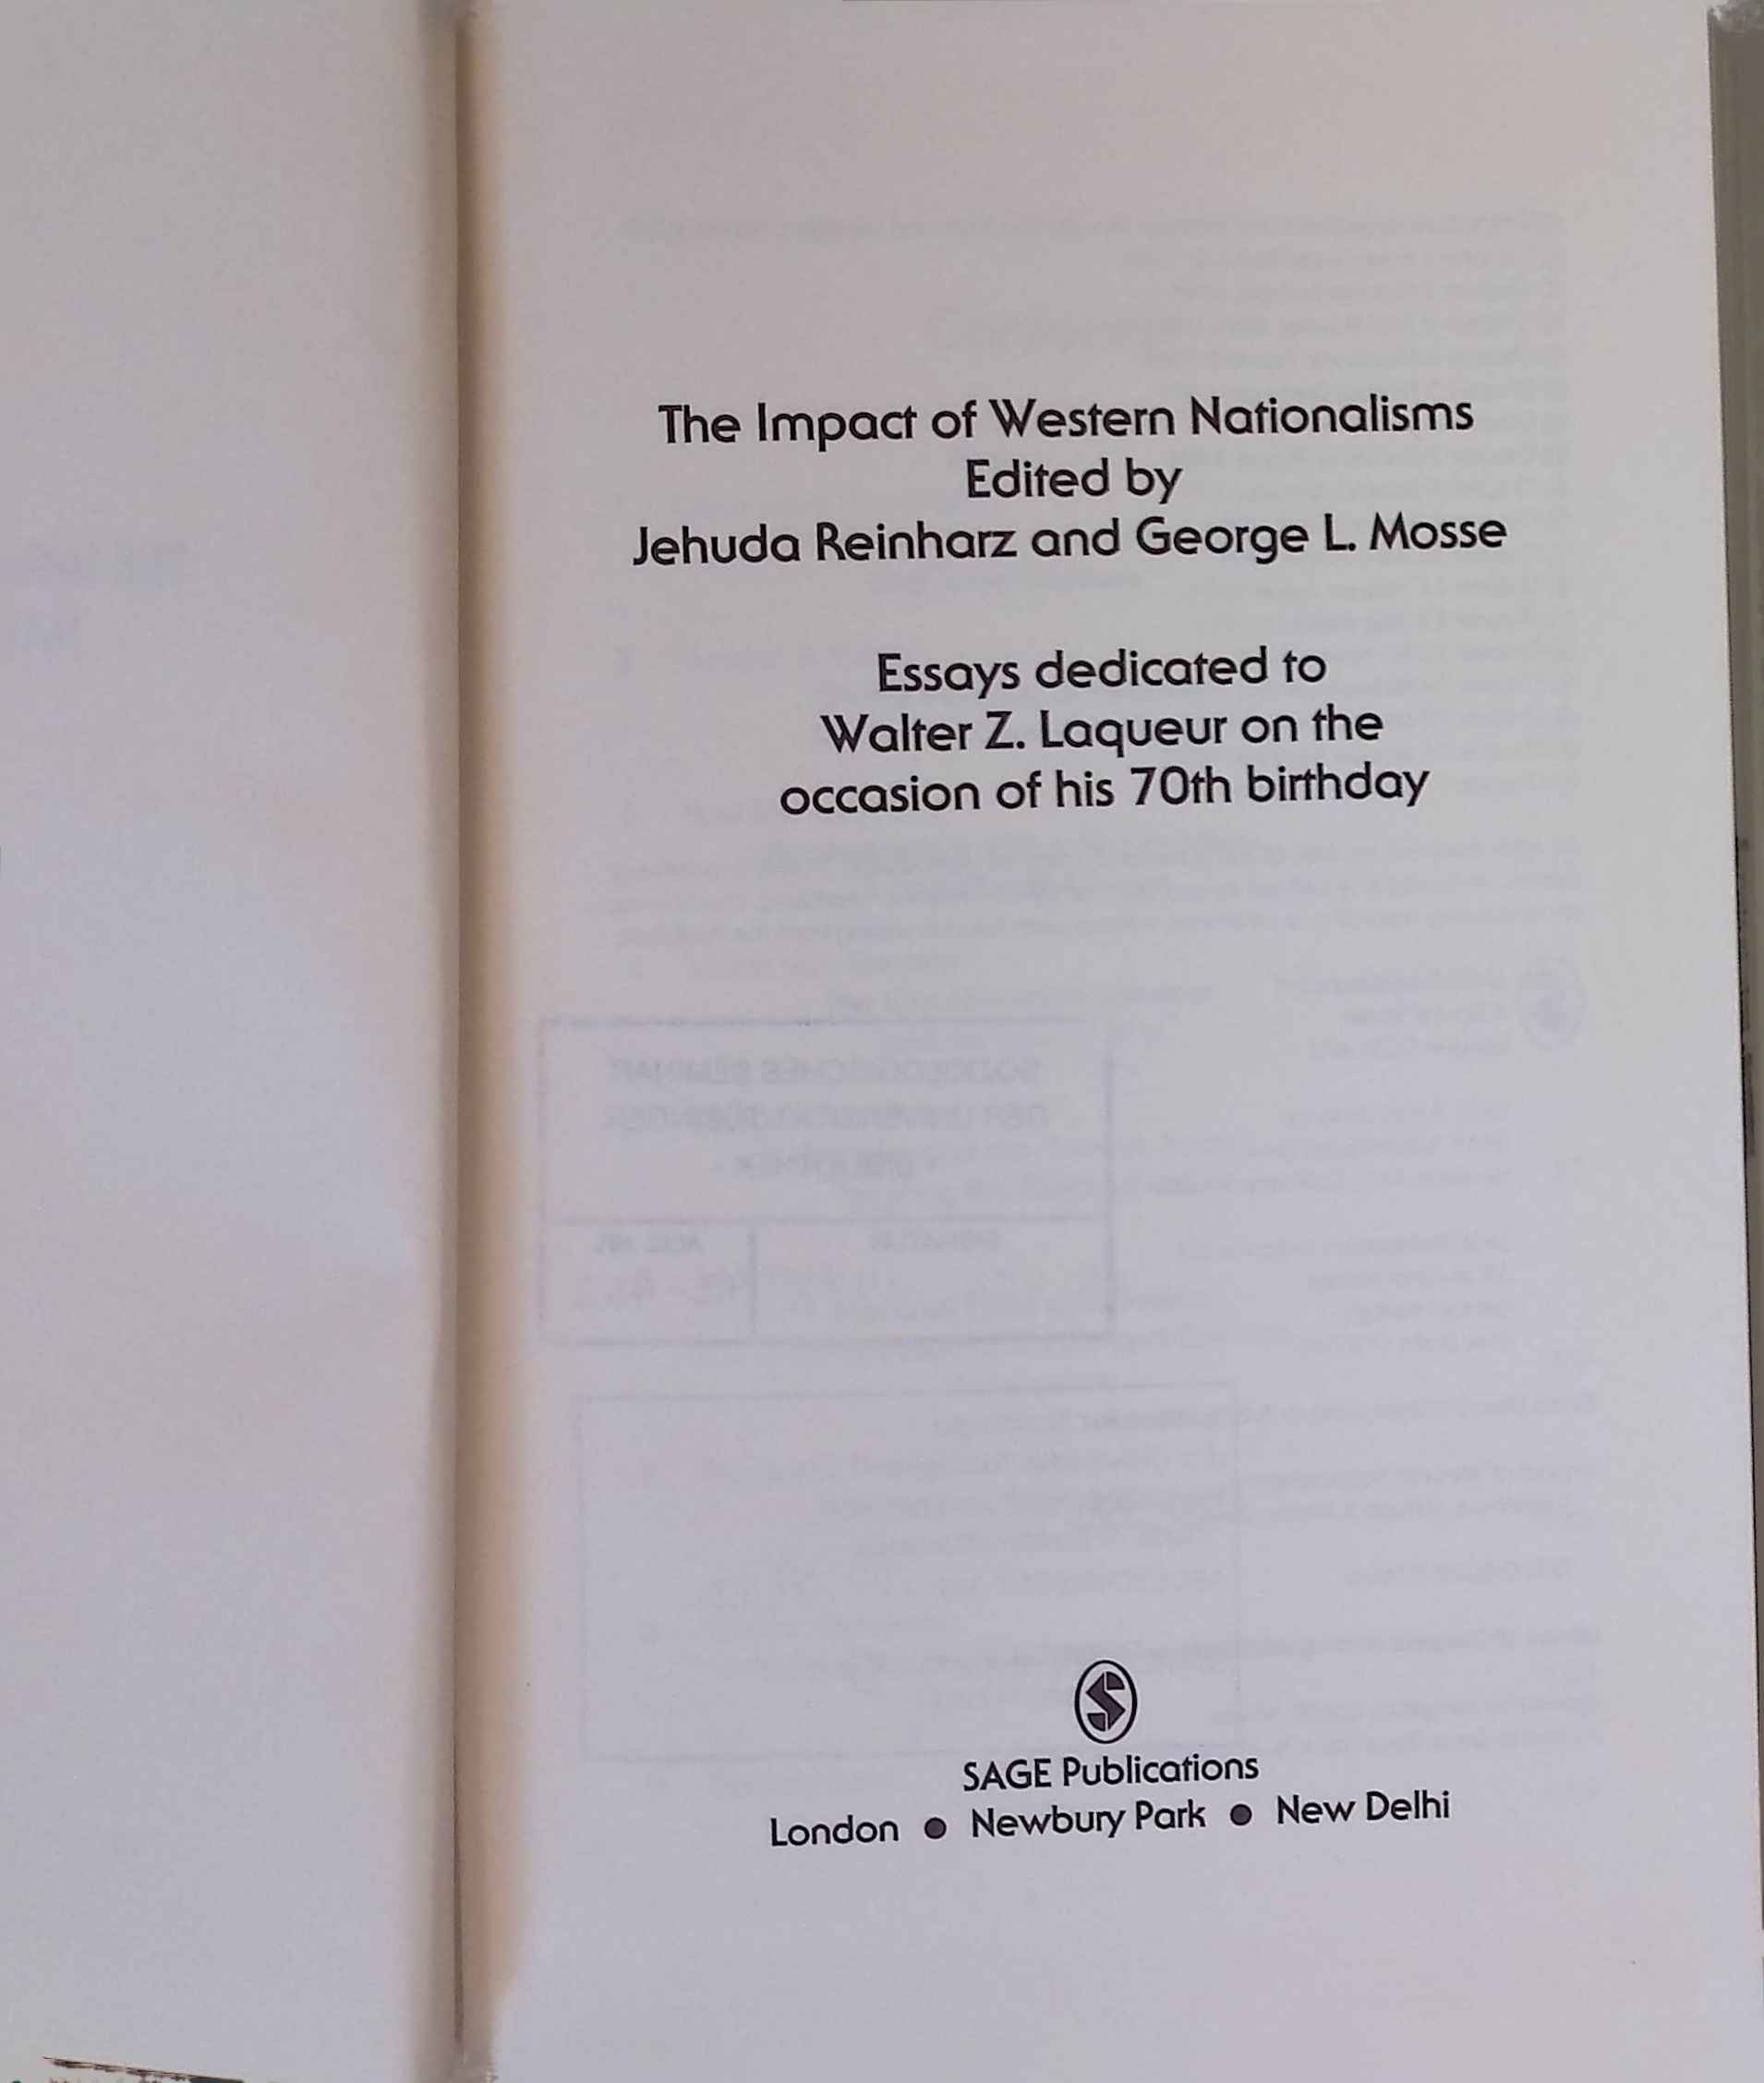 The Impact of Western Nationalisms: Essays Dedicated to Walter Z. Laqueur on the Occasion of His 70th Birthday. - Reinharz, Jehuda, George L. Mosse and Walter Laqueur